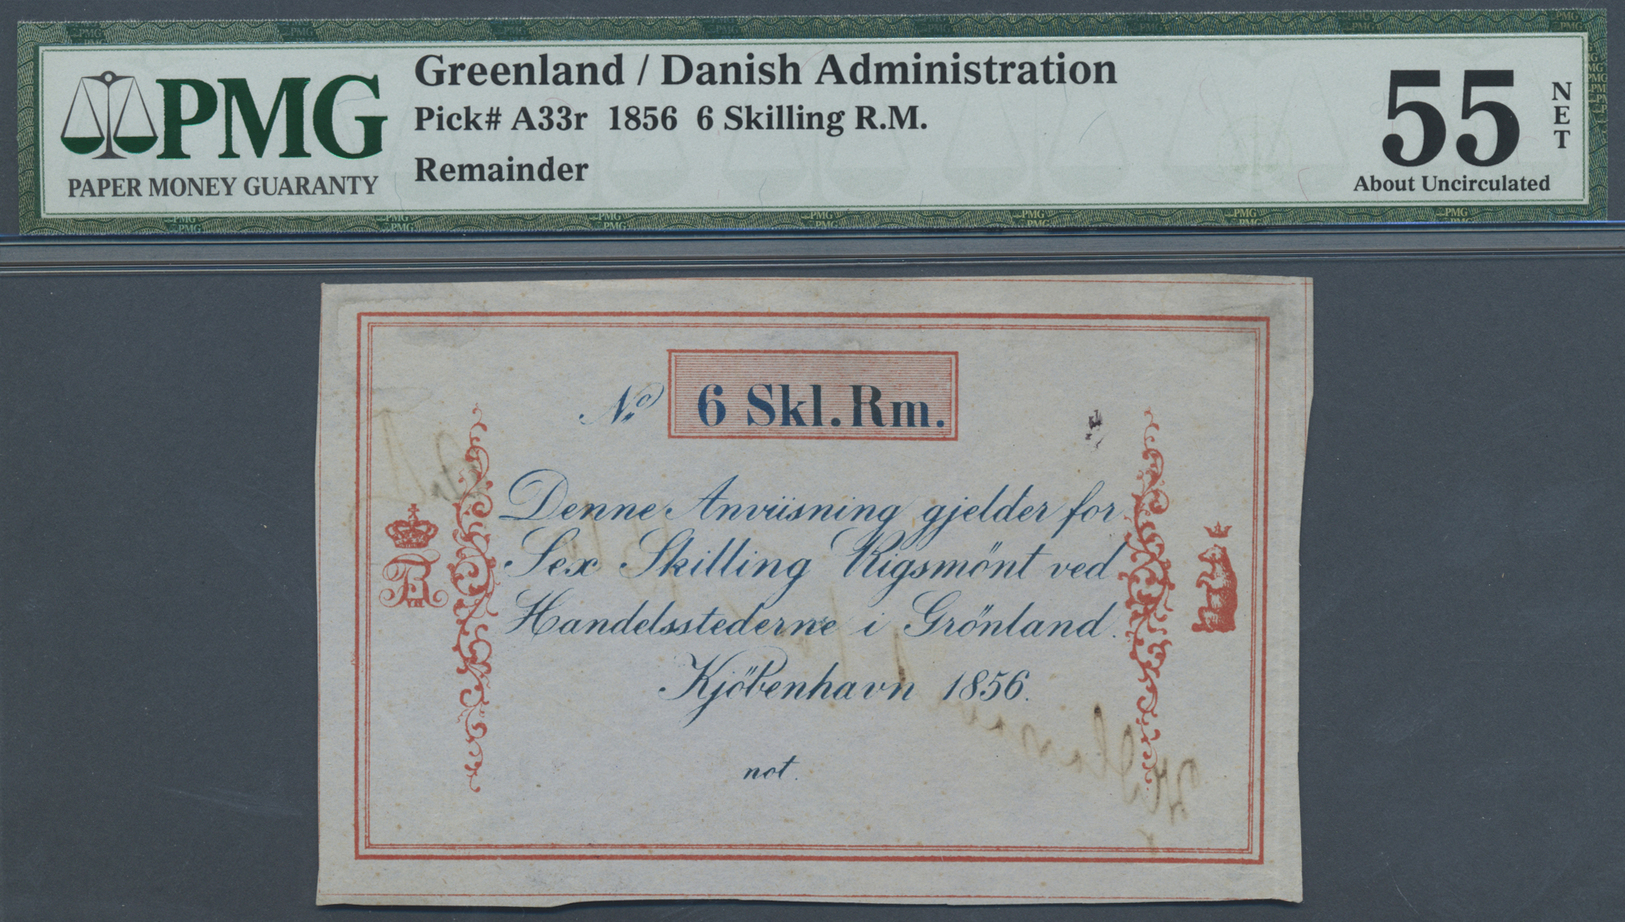 00946 Greenland / Grönland: 6 Skilling 1856 Remainder P. A33r, Rare Note And Probably Unique As PMG Graded In Condition: - Greenland